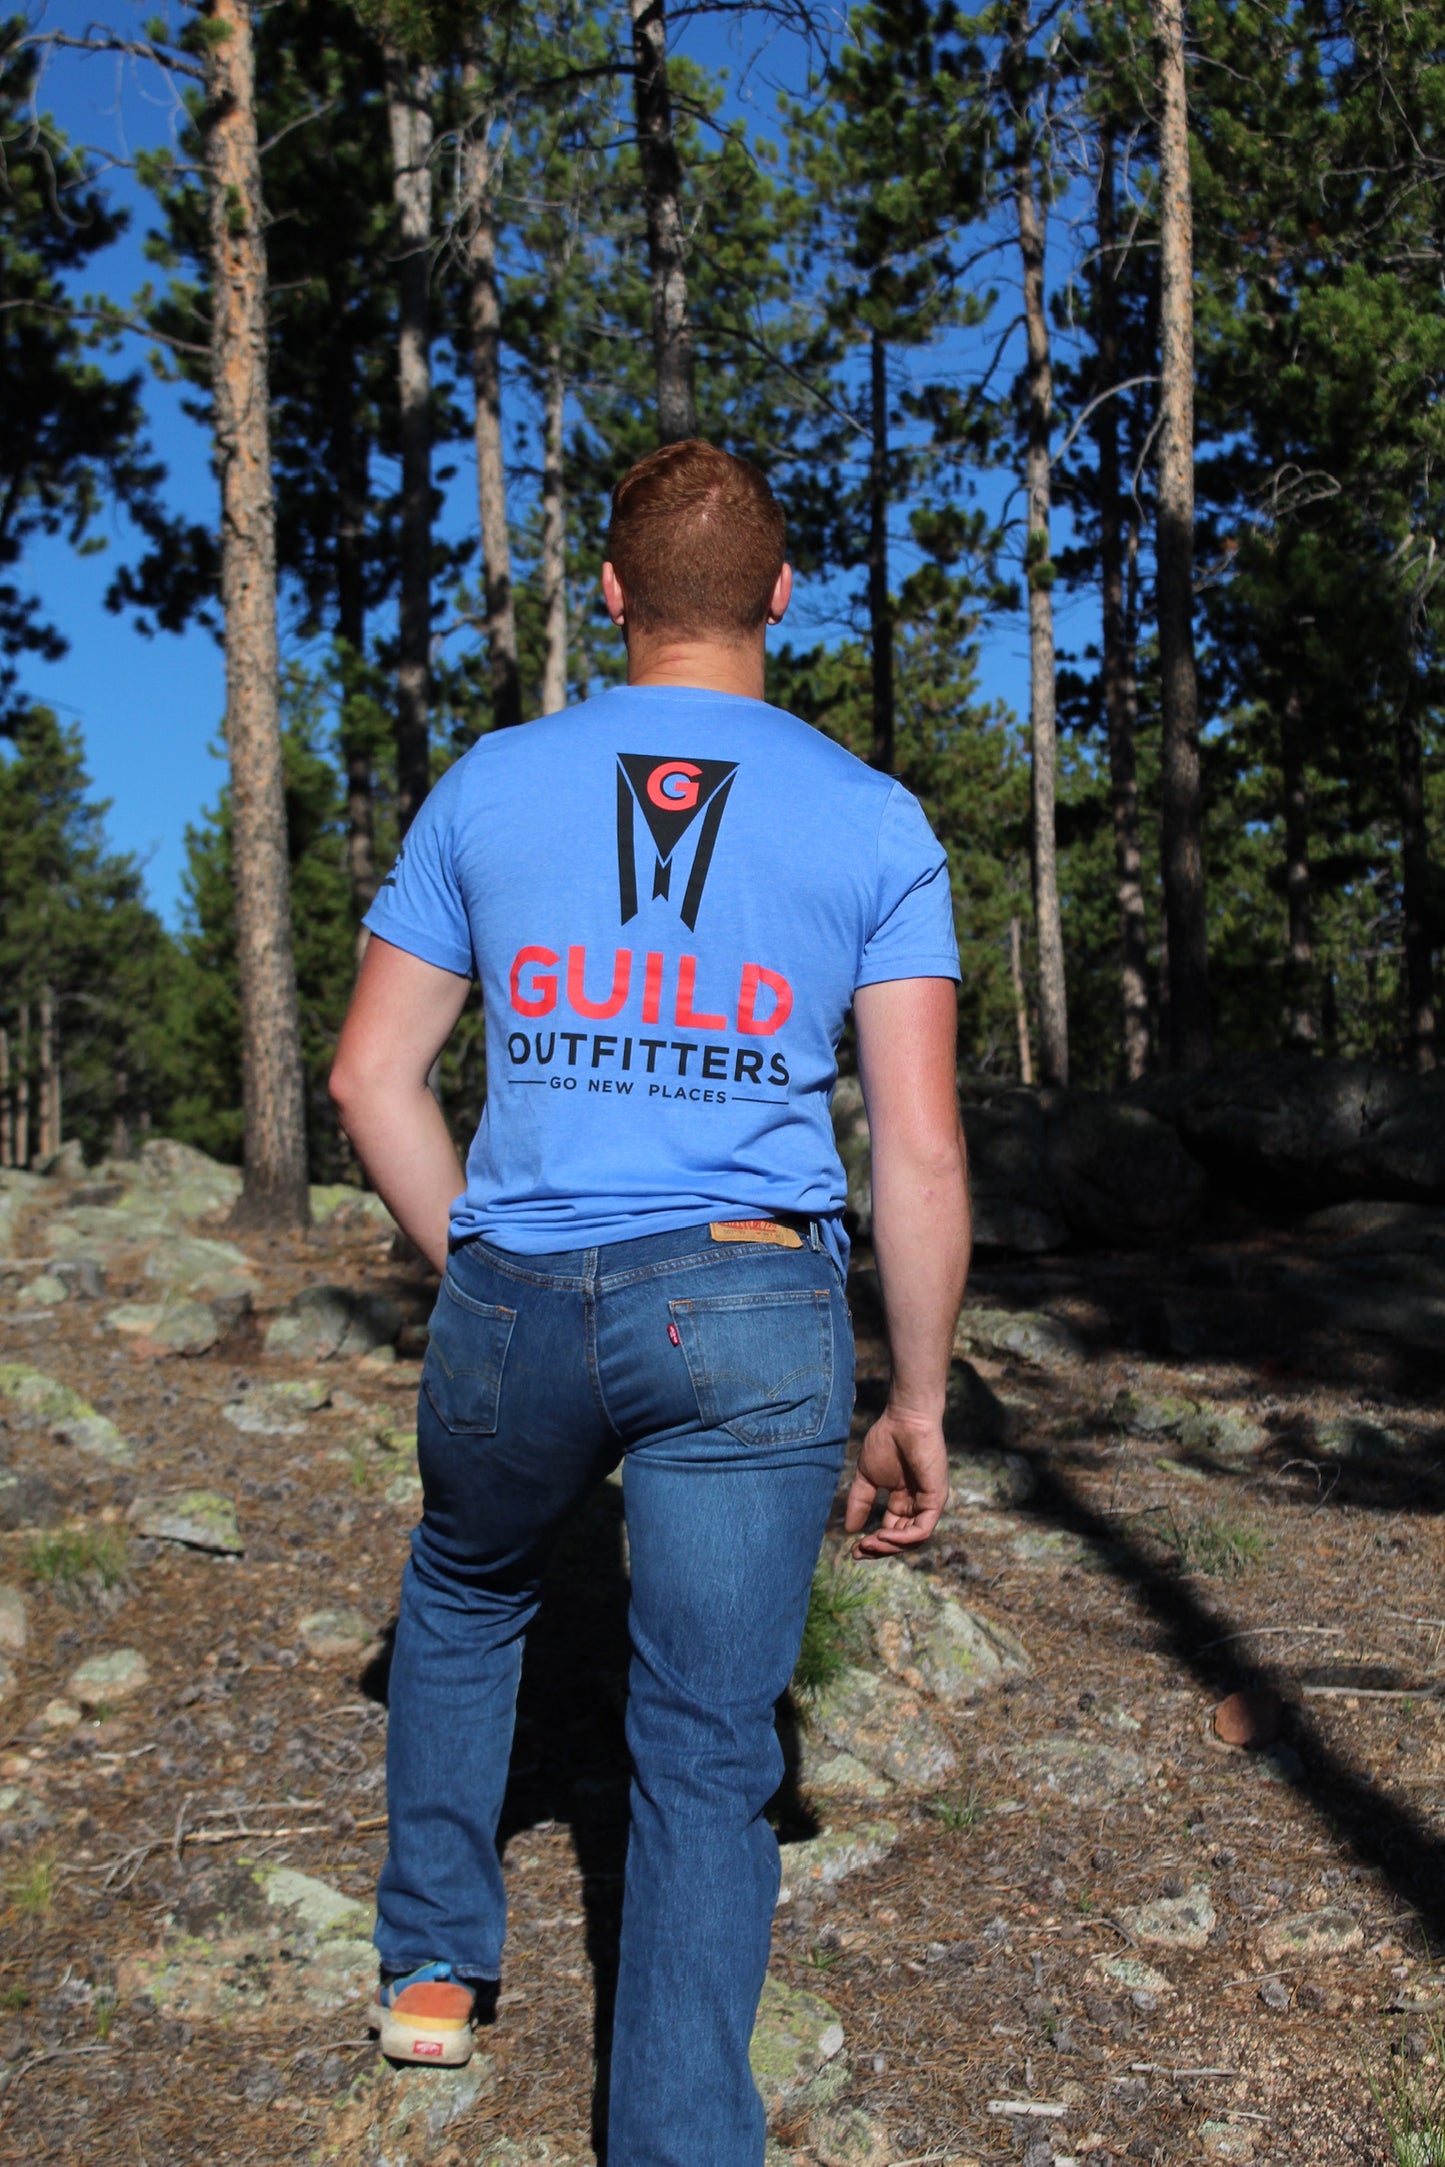 ‘22 Guild Outfitters - T-Shirt